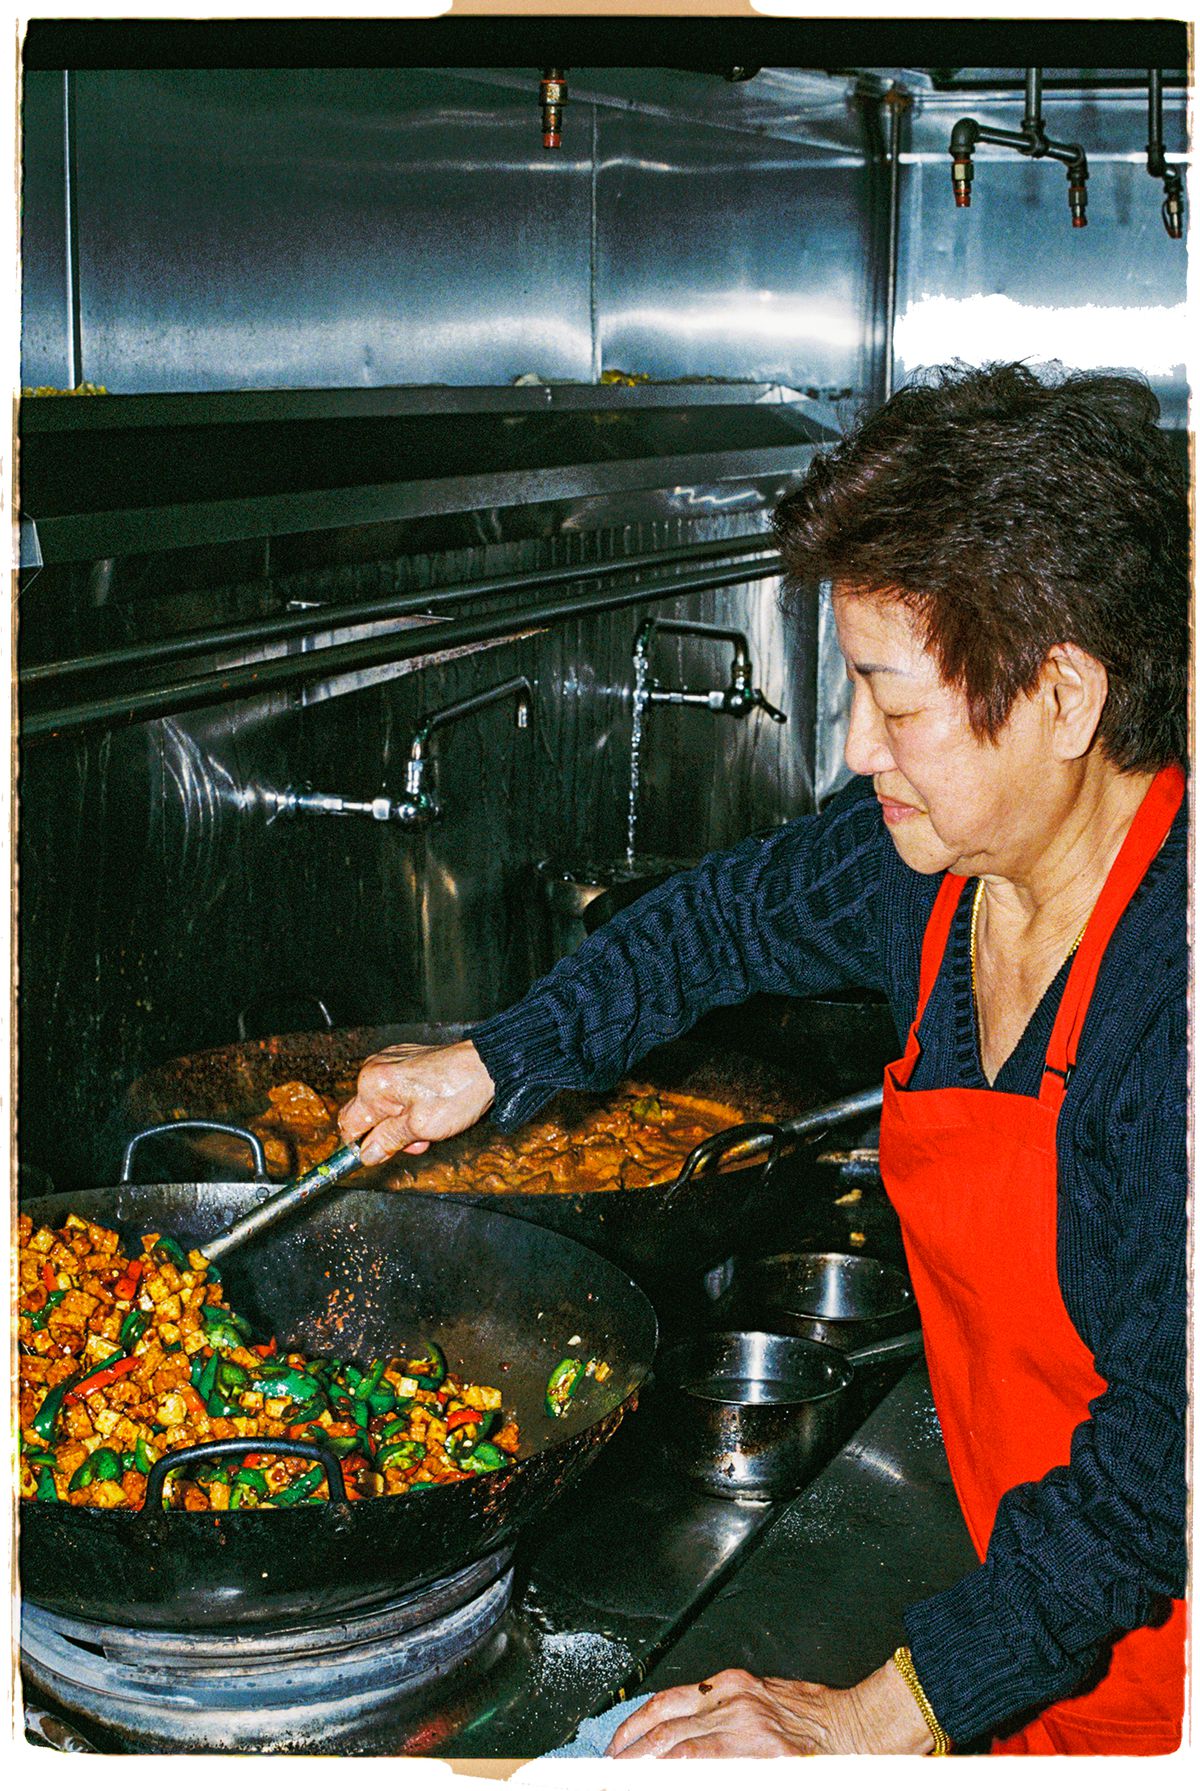 A woman wearing an apron cooks food on a wok.